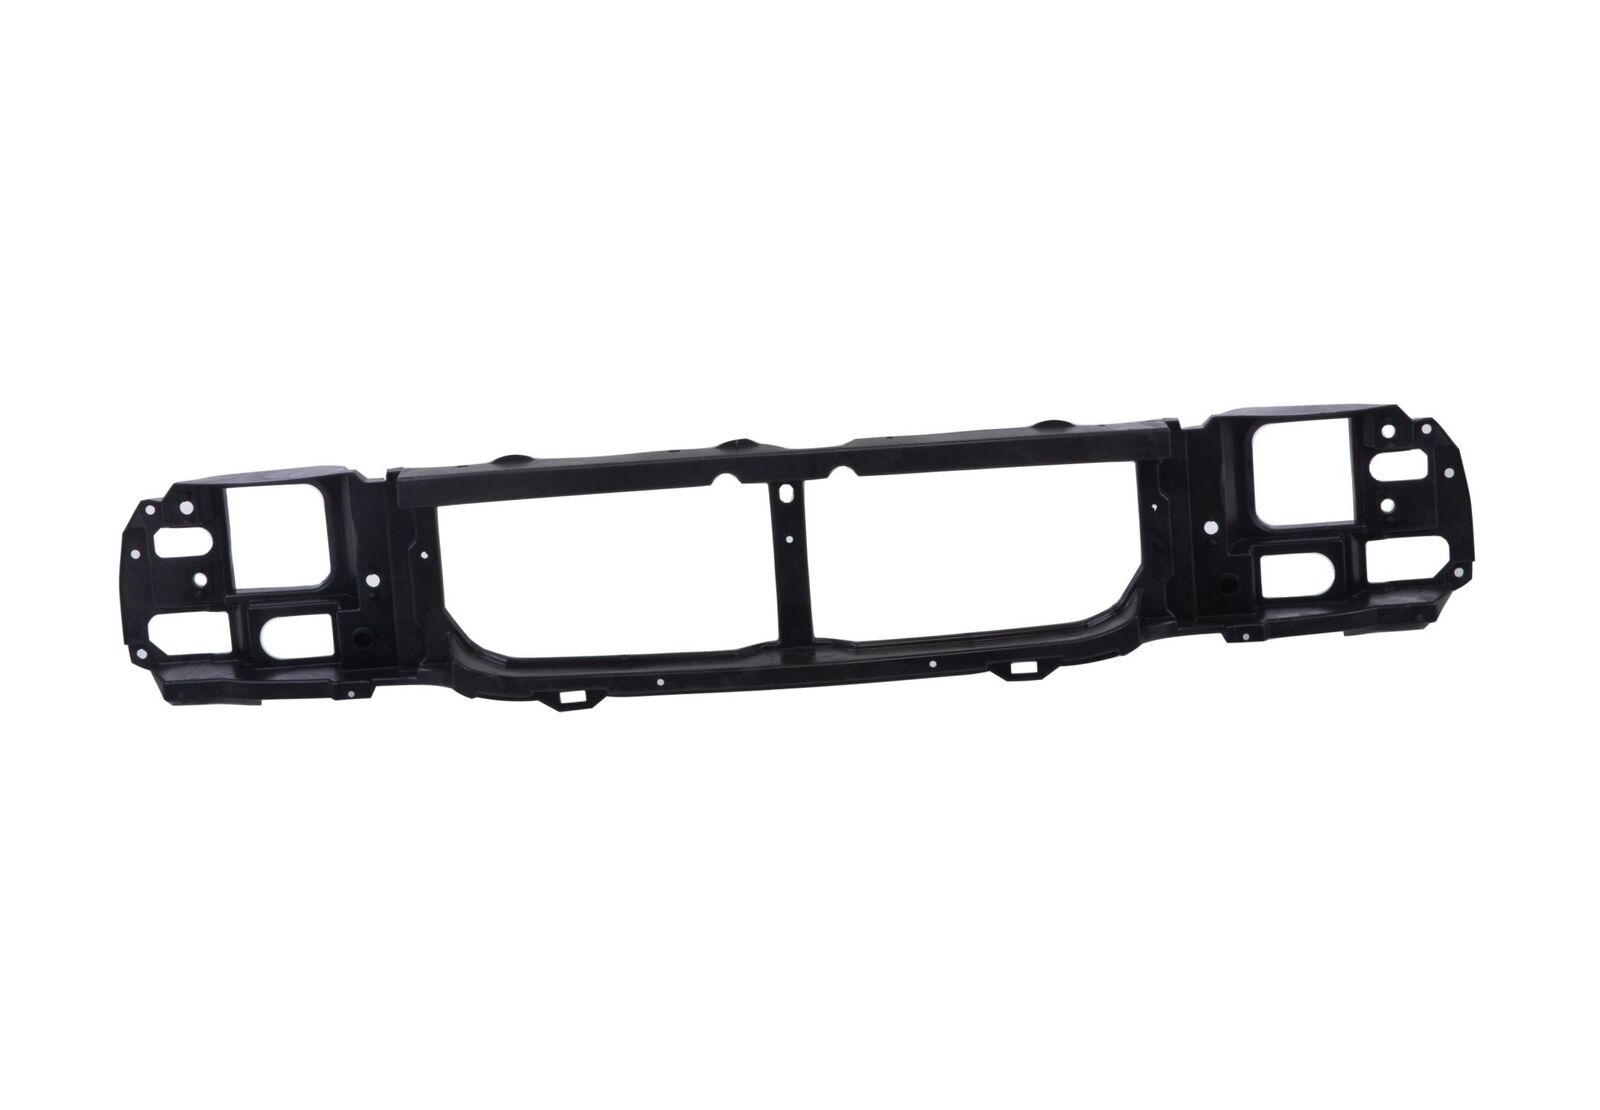 Header Panel Support Replacement For 98-00 Ford Ranger Pickup Truck